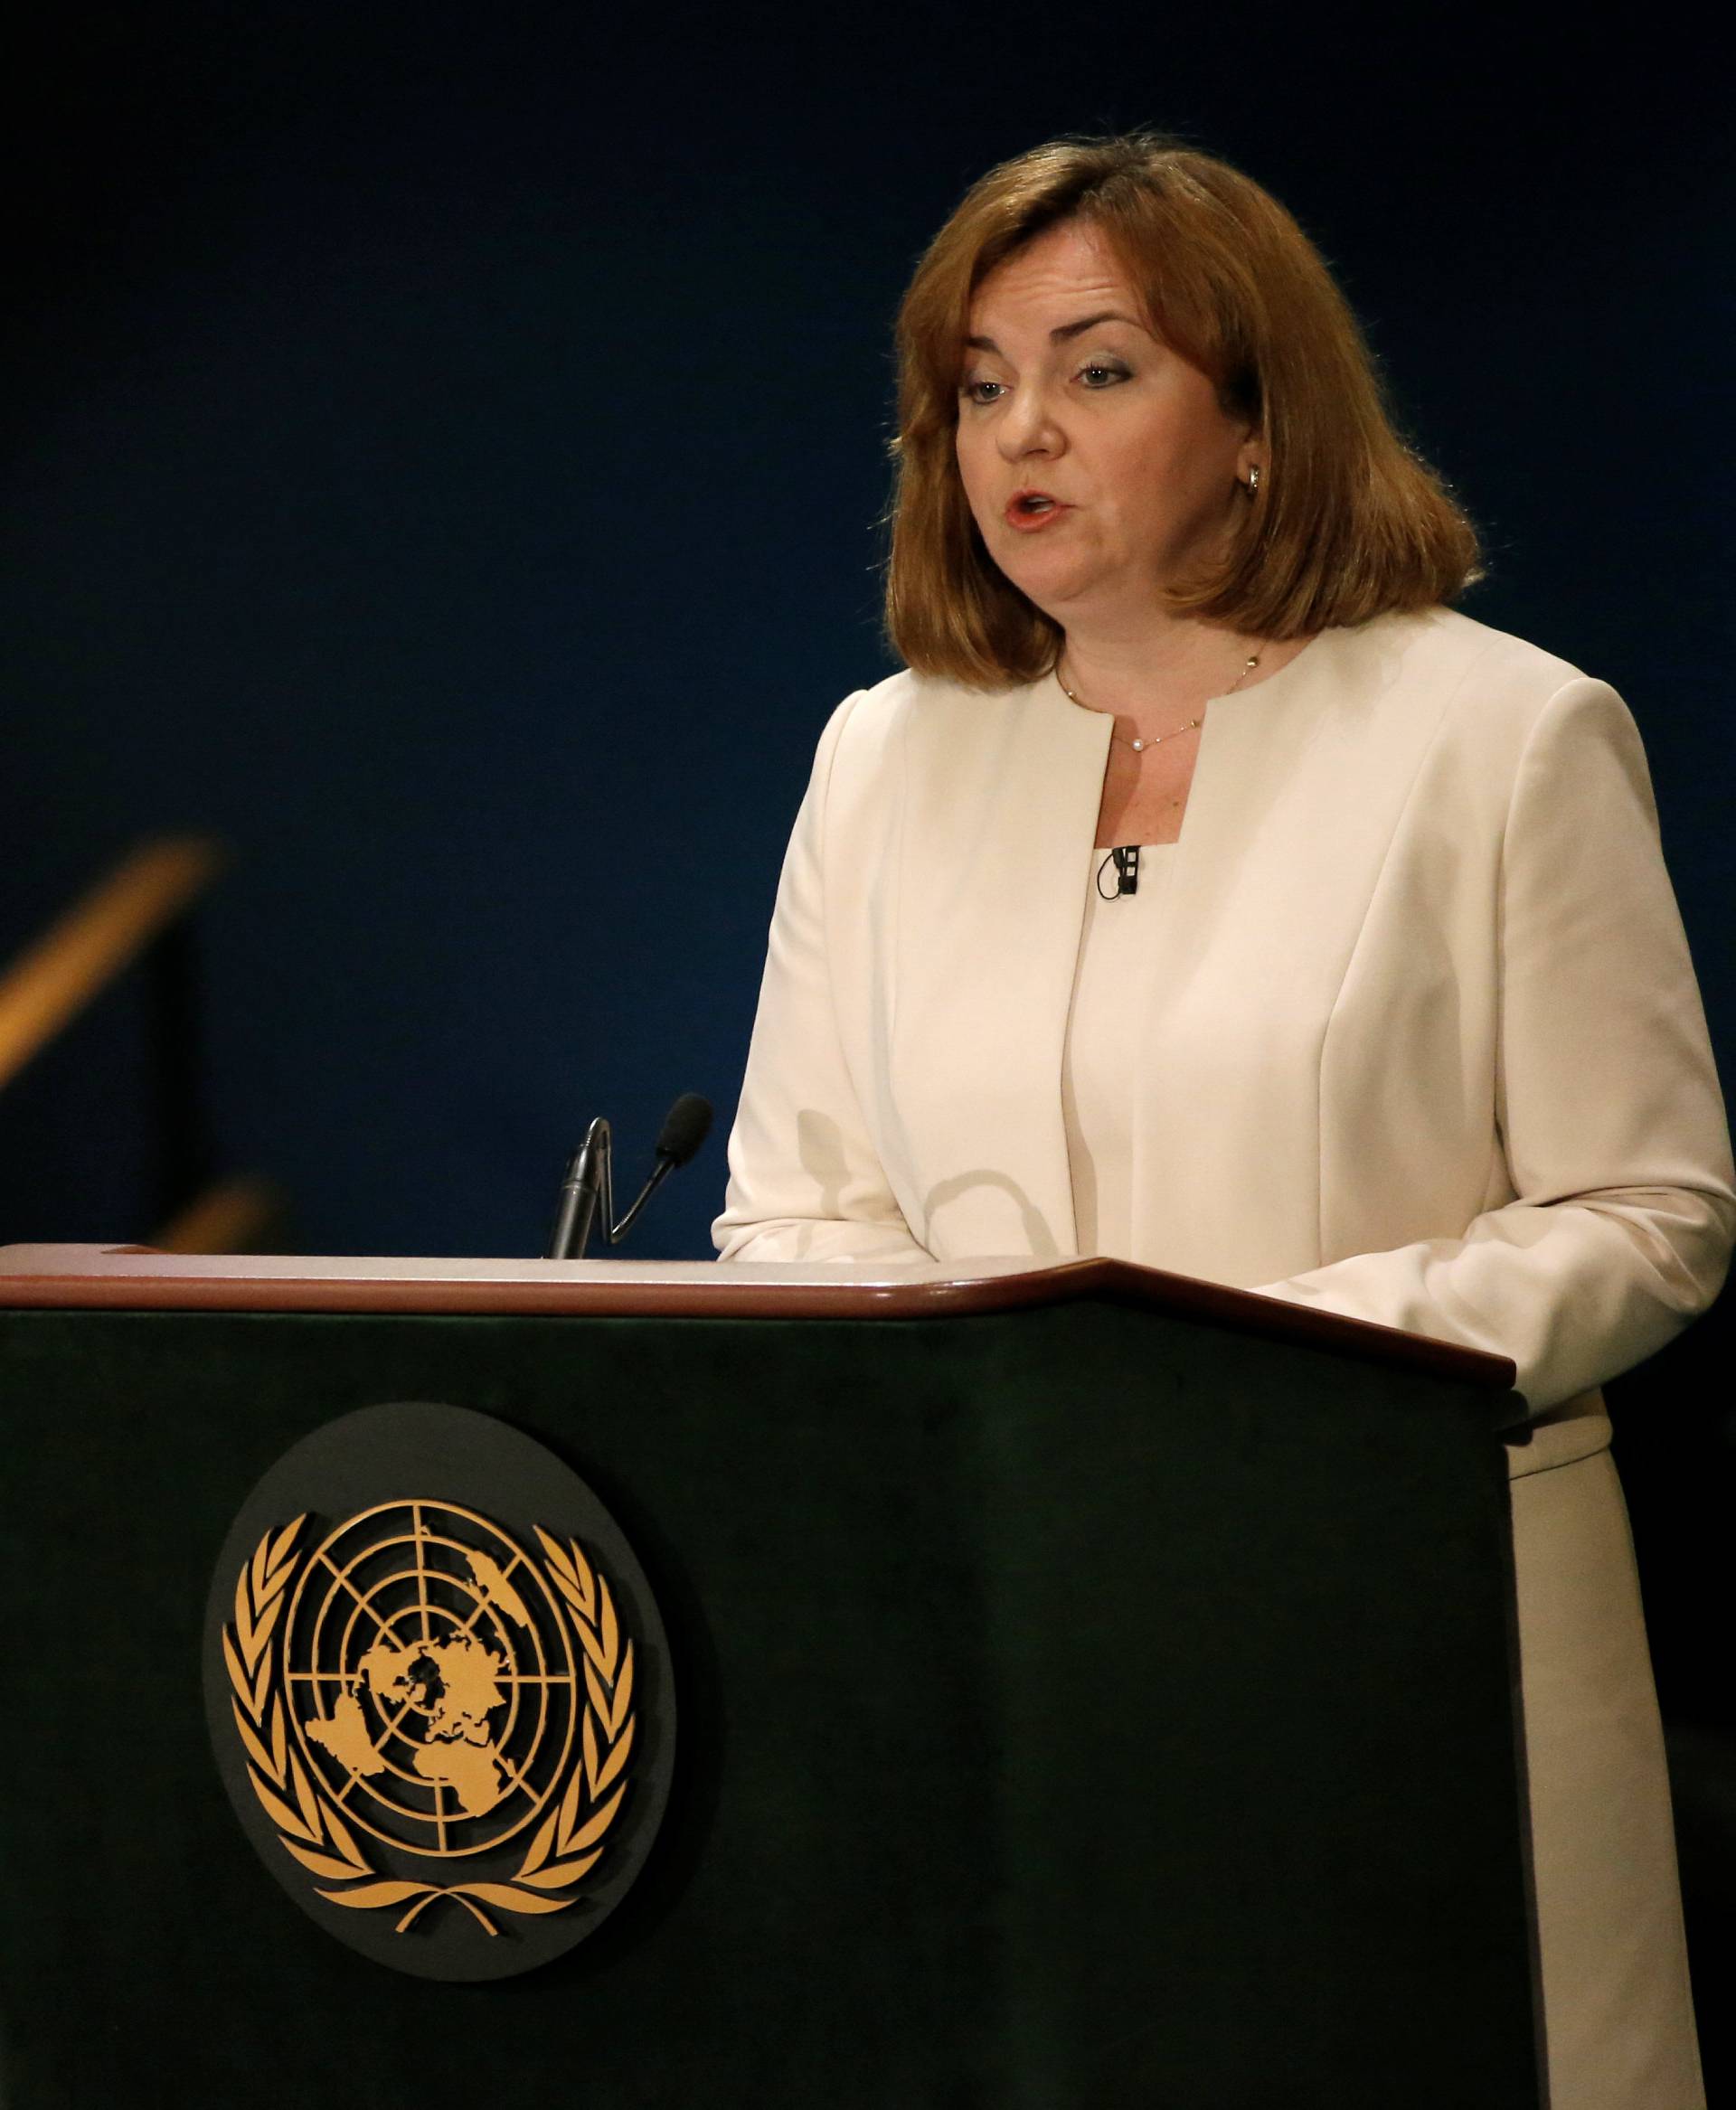 Moldova's former Foreign Minister Natalia Gherman speaks during a debate in the United Nations General Assembly between candidates vying to be the next U.N. Secretary General at U.N. headquarters in New York